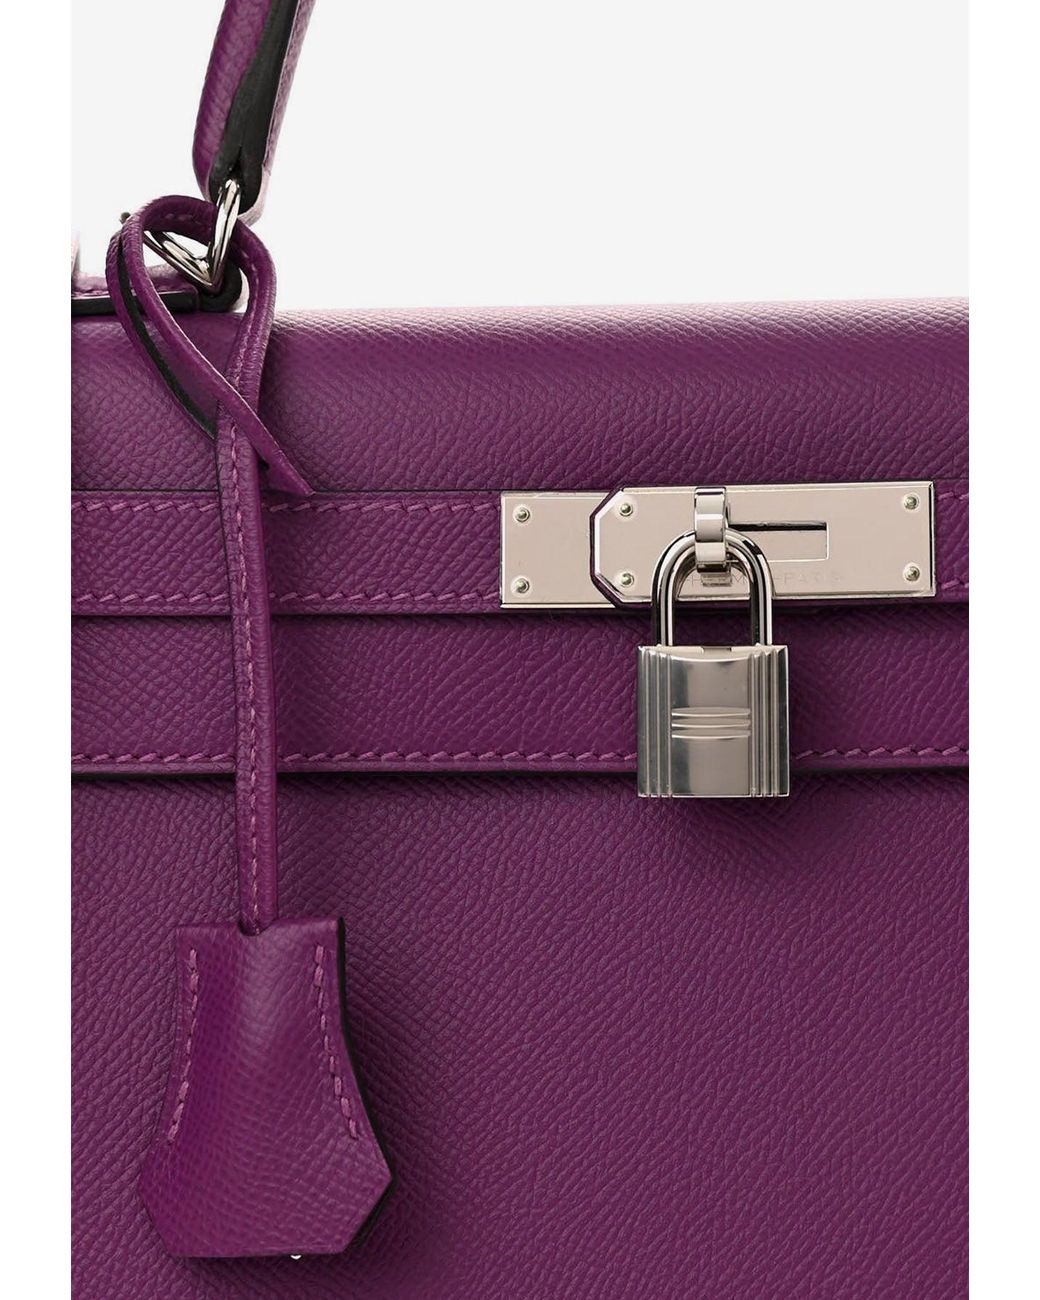 Hermès Kelly 28 Sellier In Anemone Epsom Leather With Palladium Hardware in  Purple